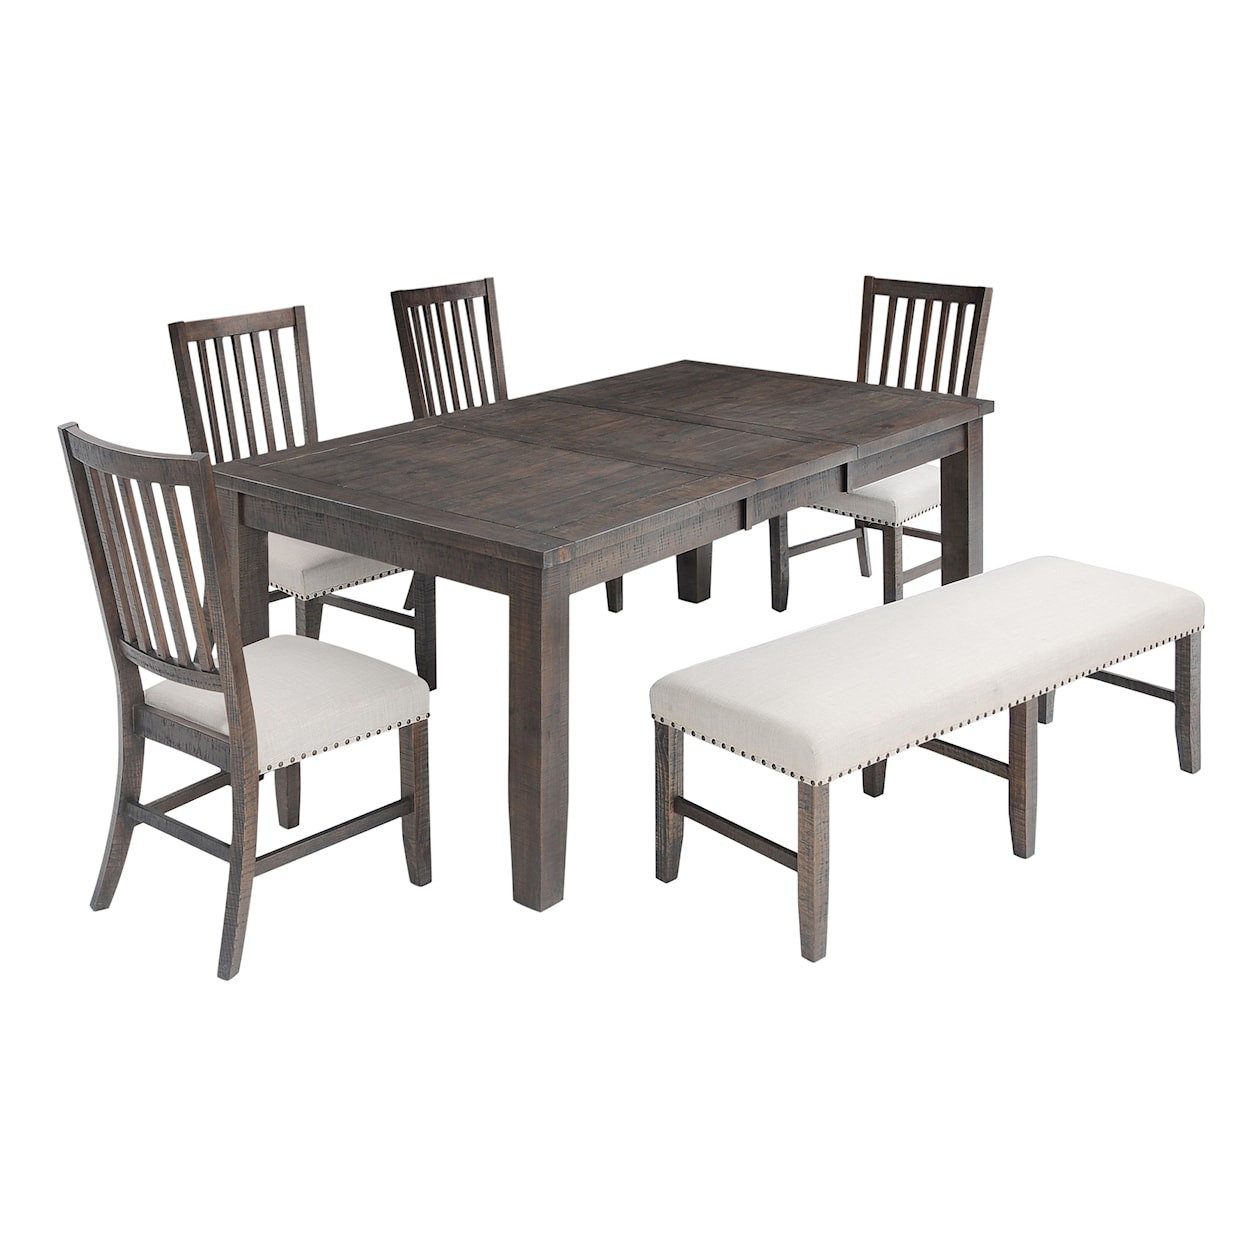 Jofran Willow Creek Extension Dining Table